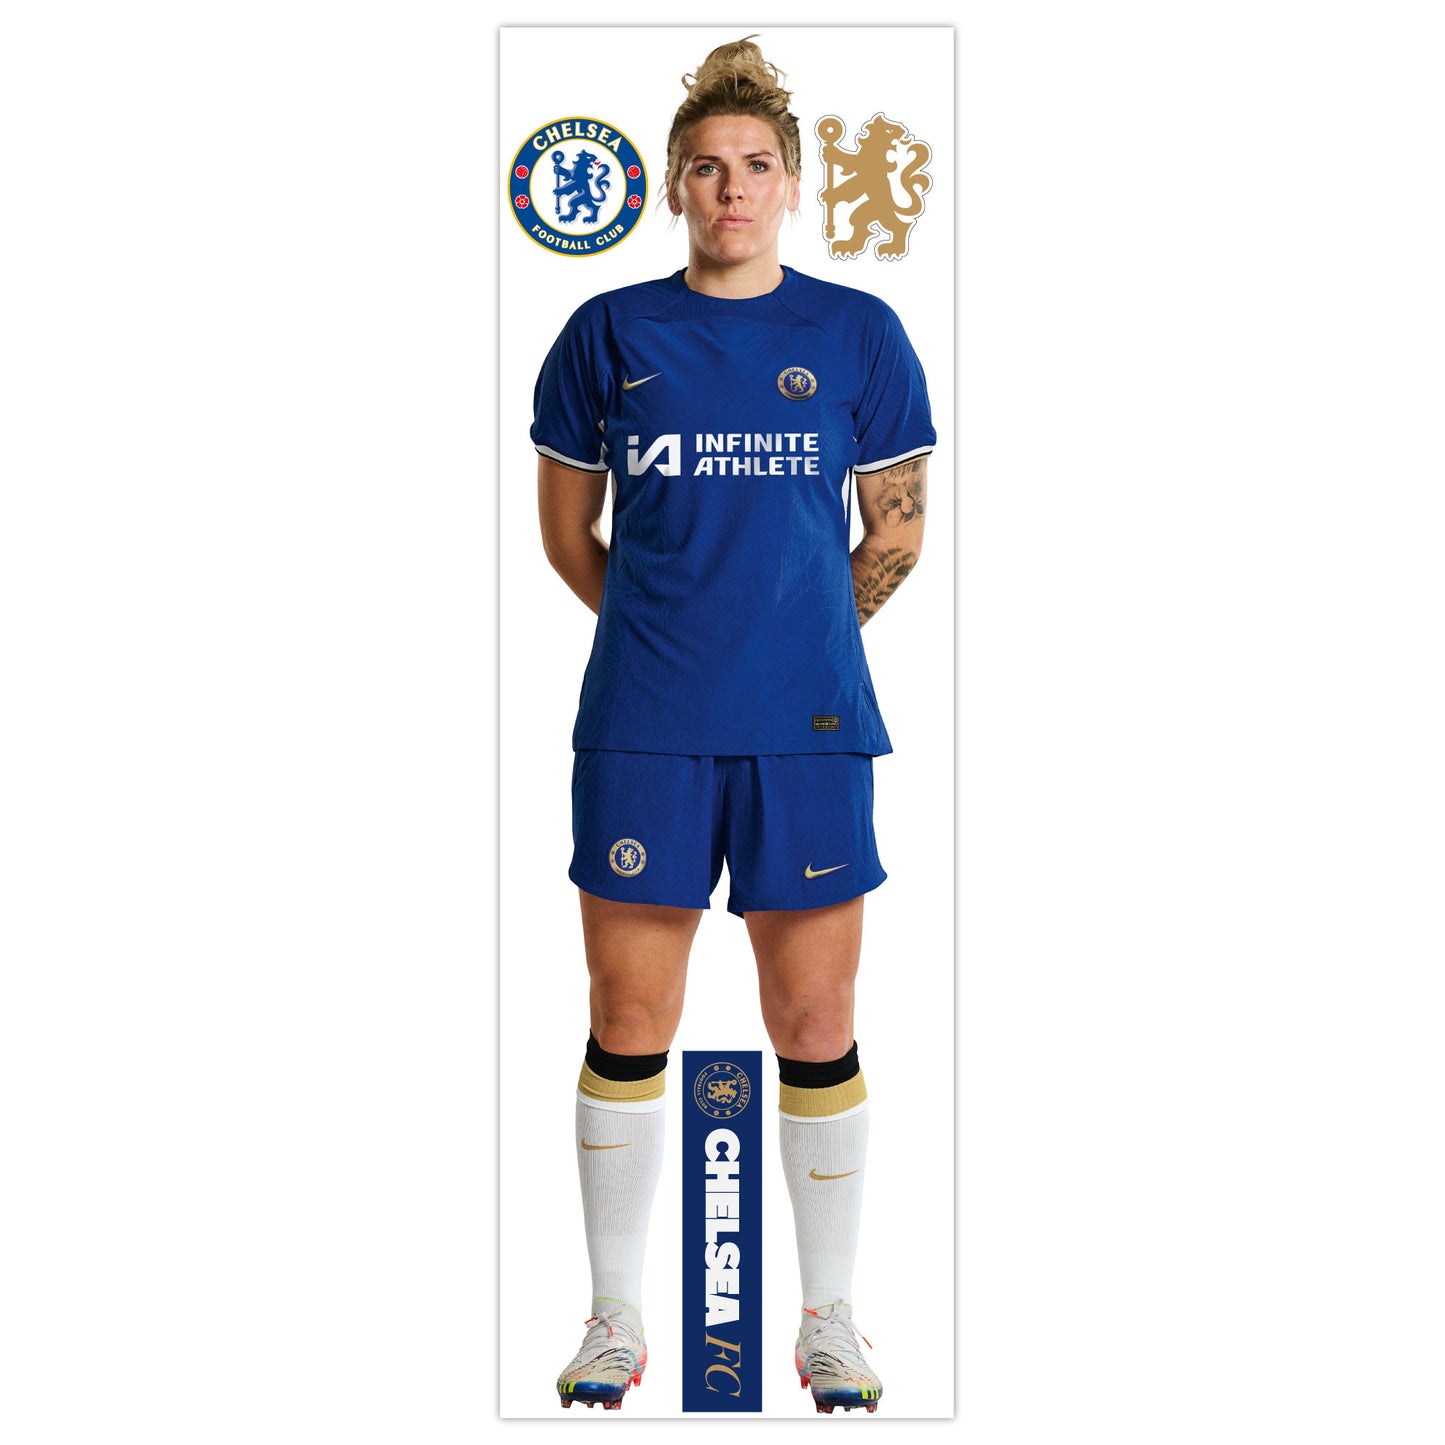 Chelsea FC - Millie Bright 23/24 Wall Sticker + CFC Decal Set